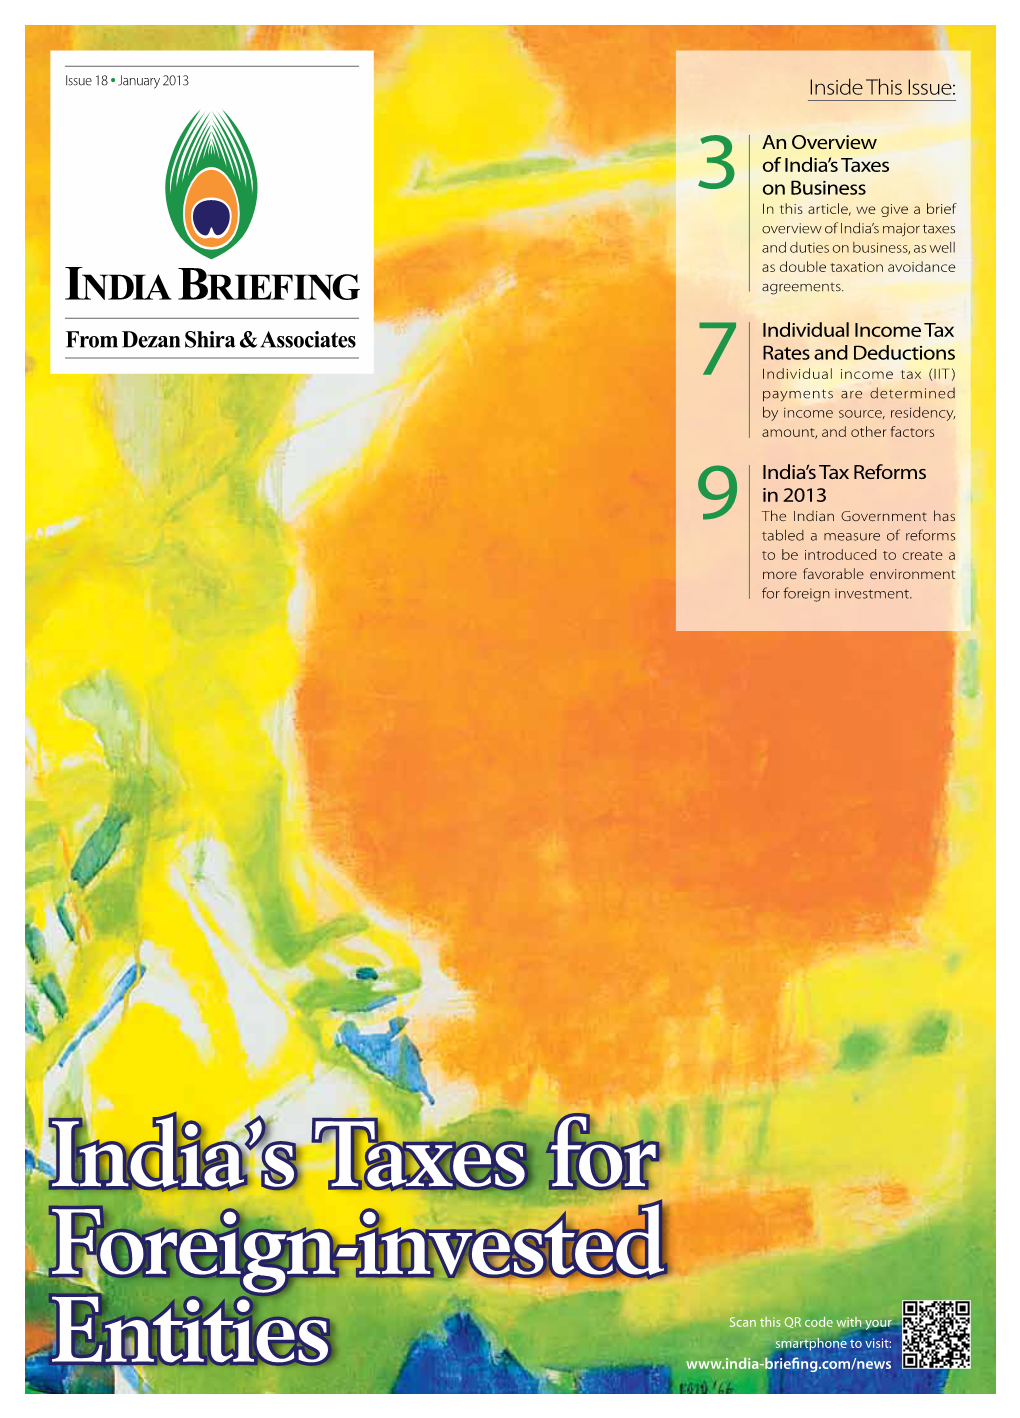 India's Taxes for Foreign-Invested Entities